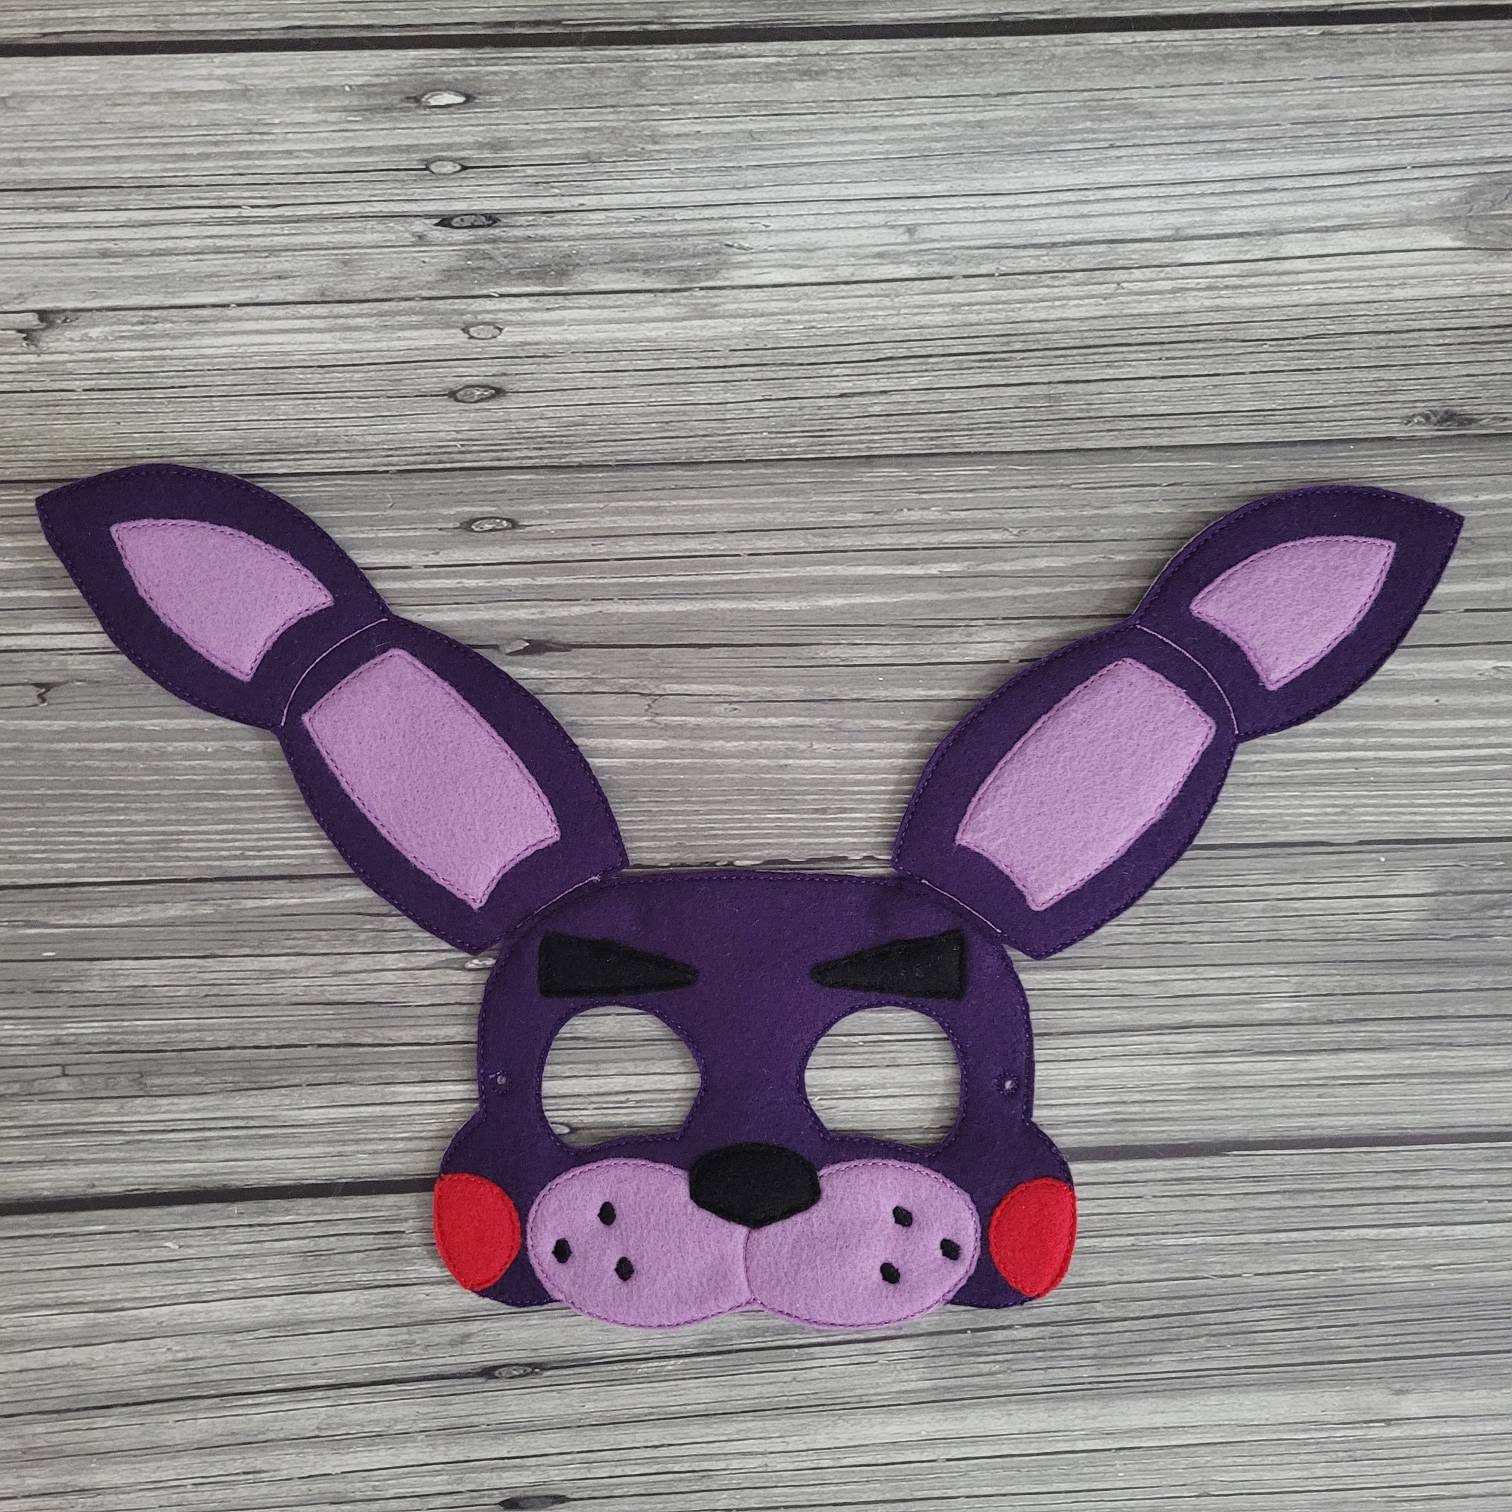 New Arrival】Xcoser Five Nights at Freddy's Bonnie Rabbit Cosplay Mask